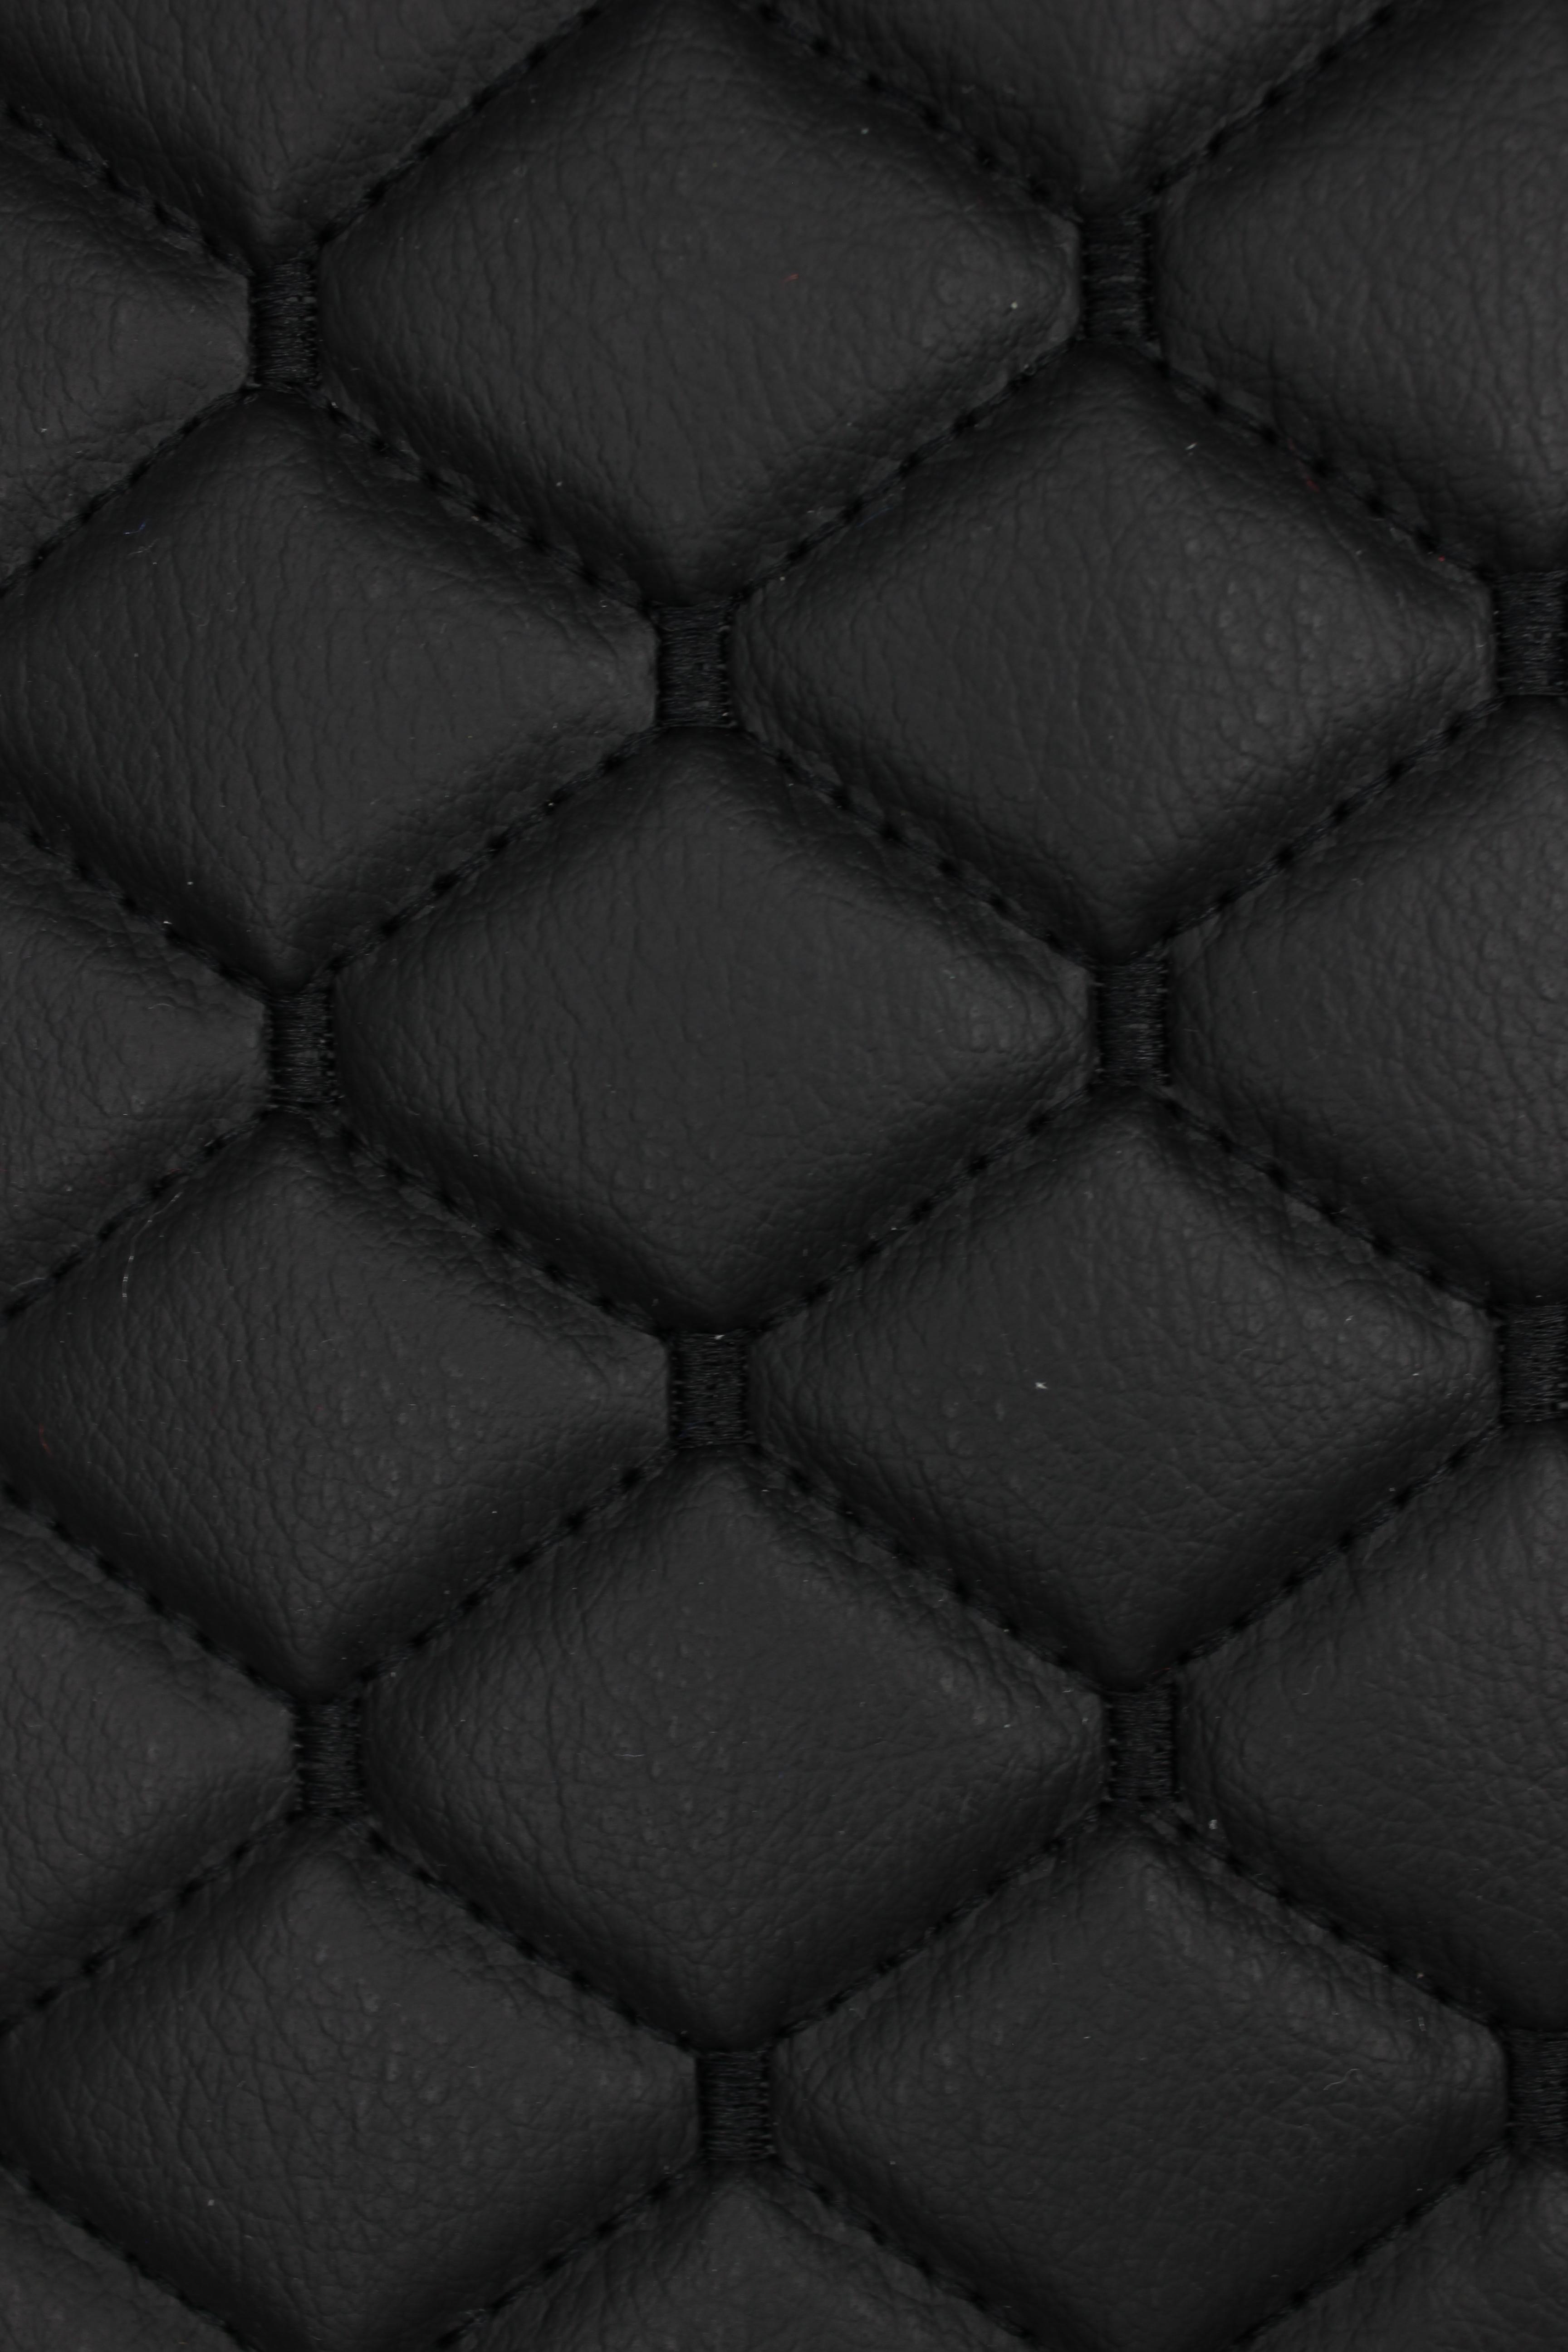 Black Quilted Black Vinyl Faux Leather Car Upholstery Fabric | 2"x2" 5x5cm Diamond Stitch with 5mm Foam Backing | 140cm Wide | Automotive Projects